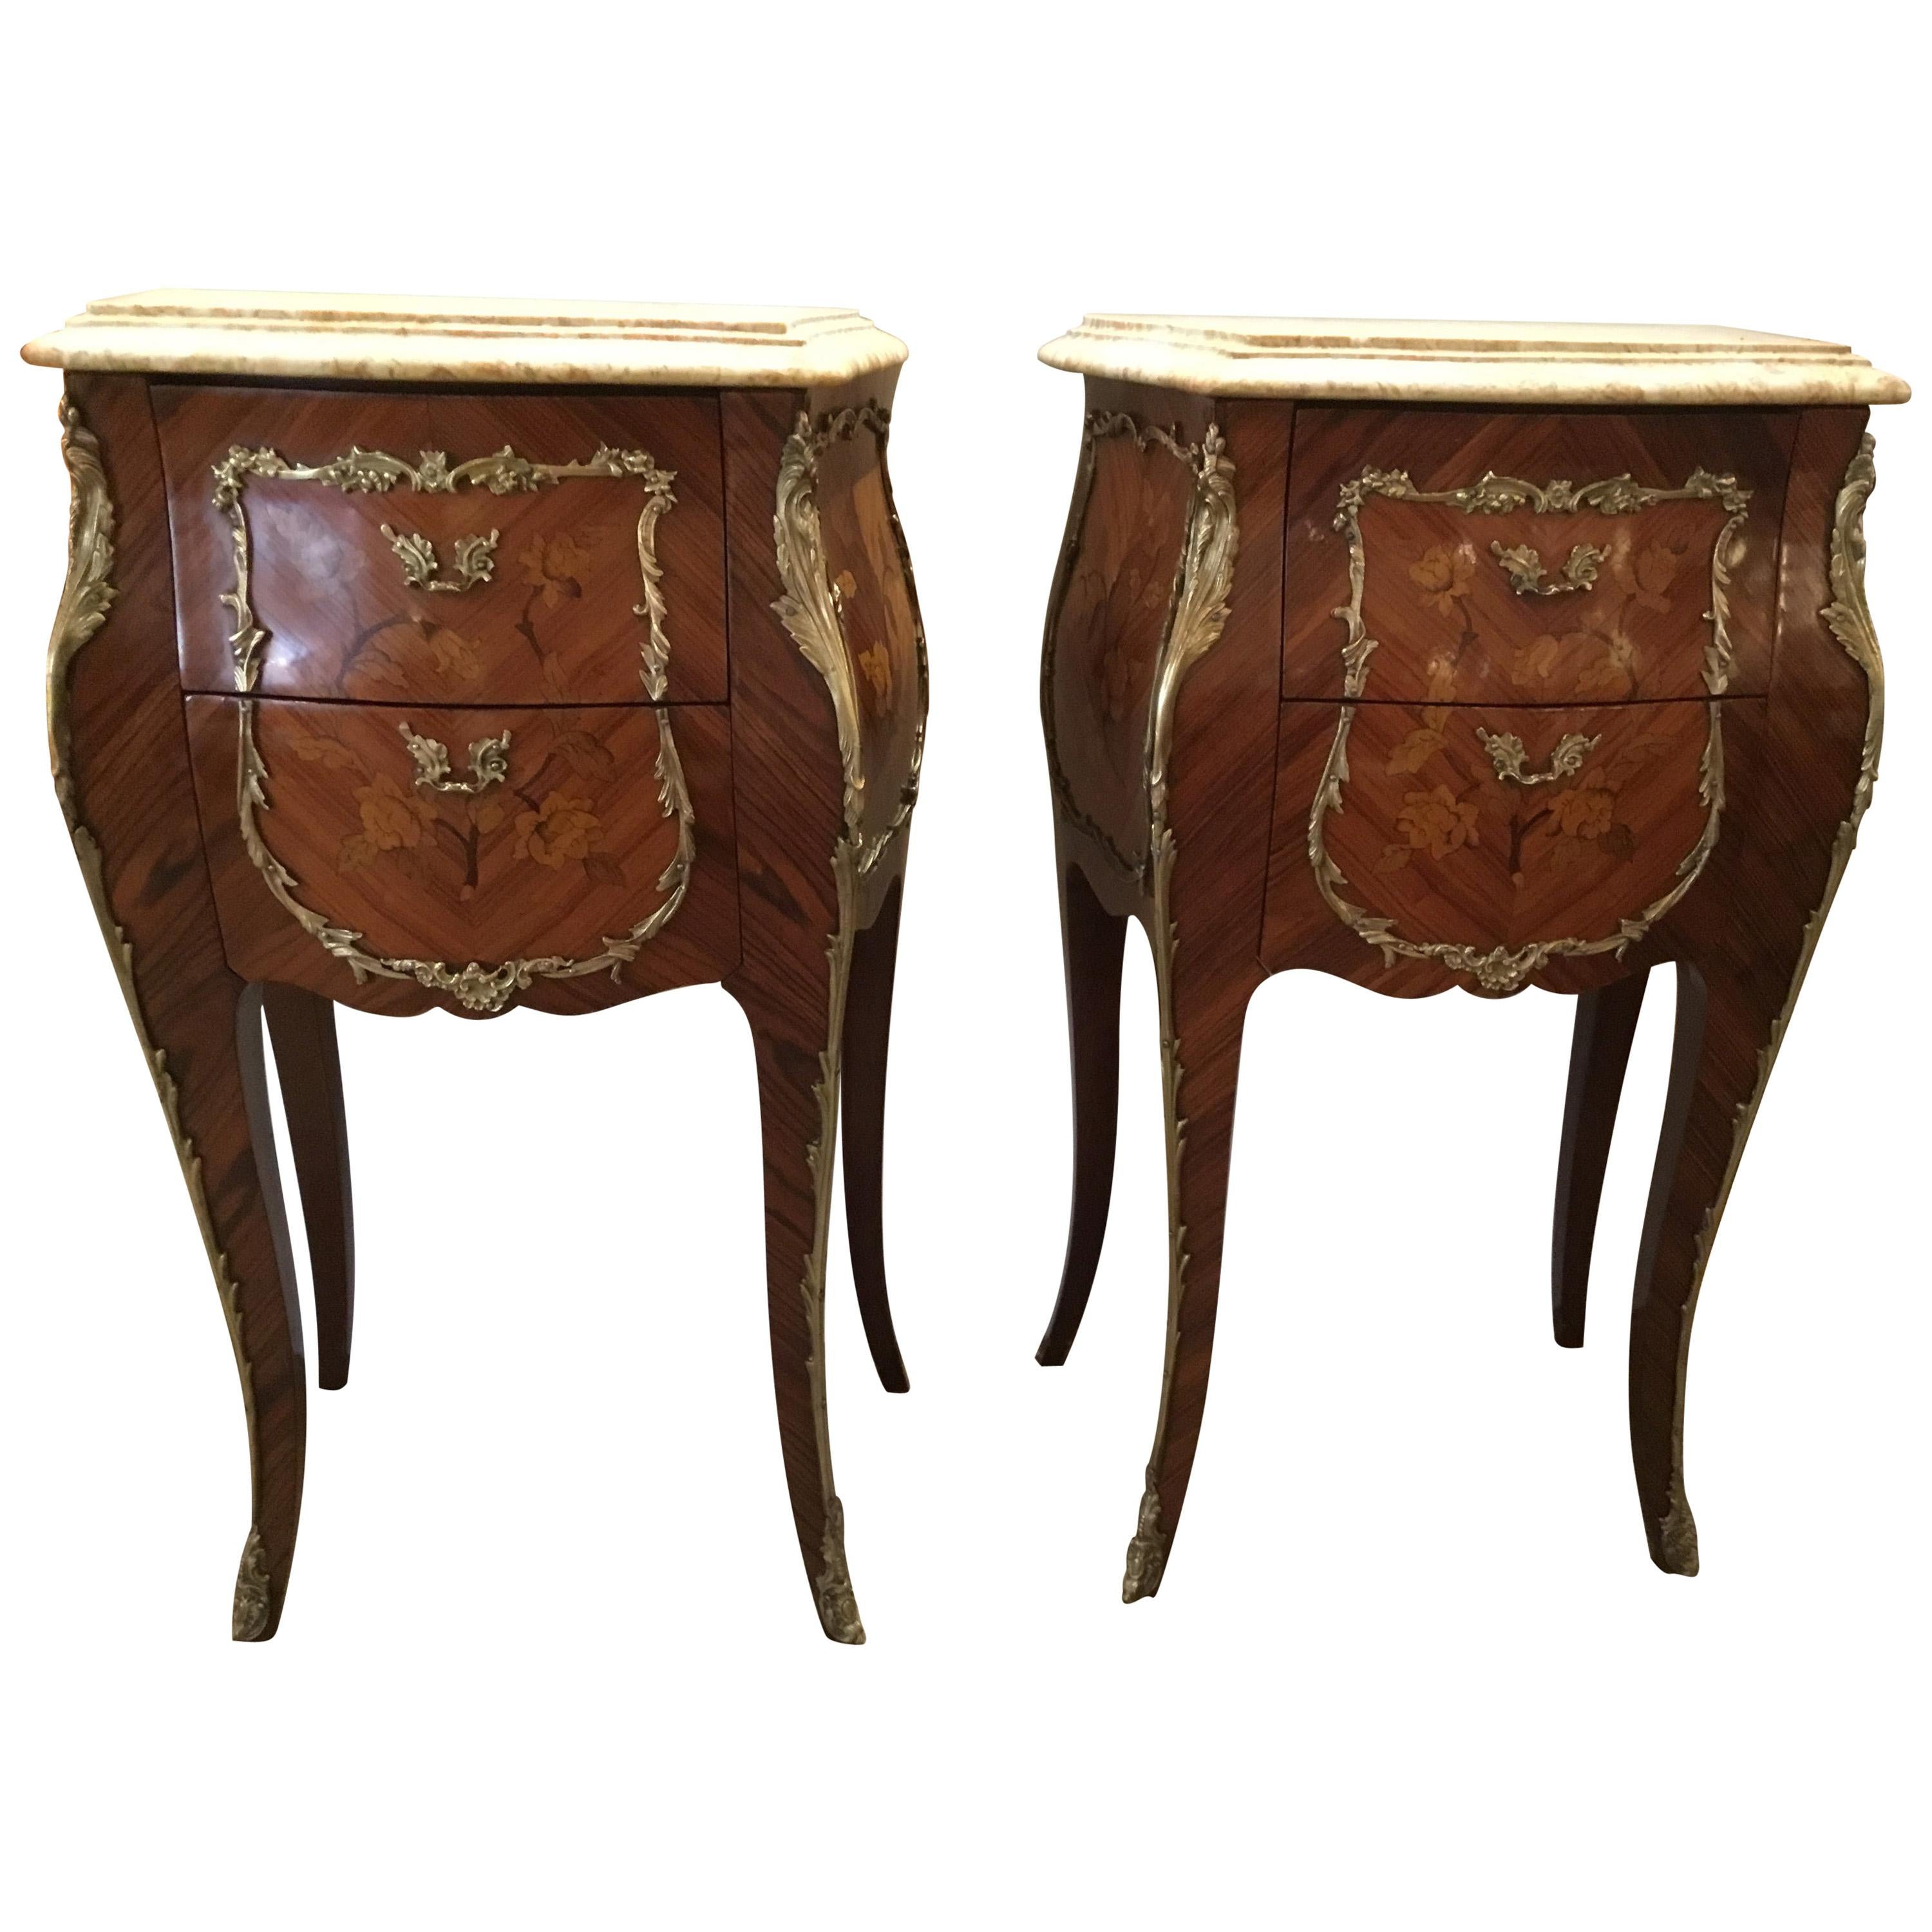 Pair of French Louis XV Style Marble Top Nightstands with Marquetry and Bronze